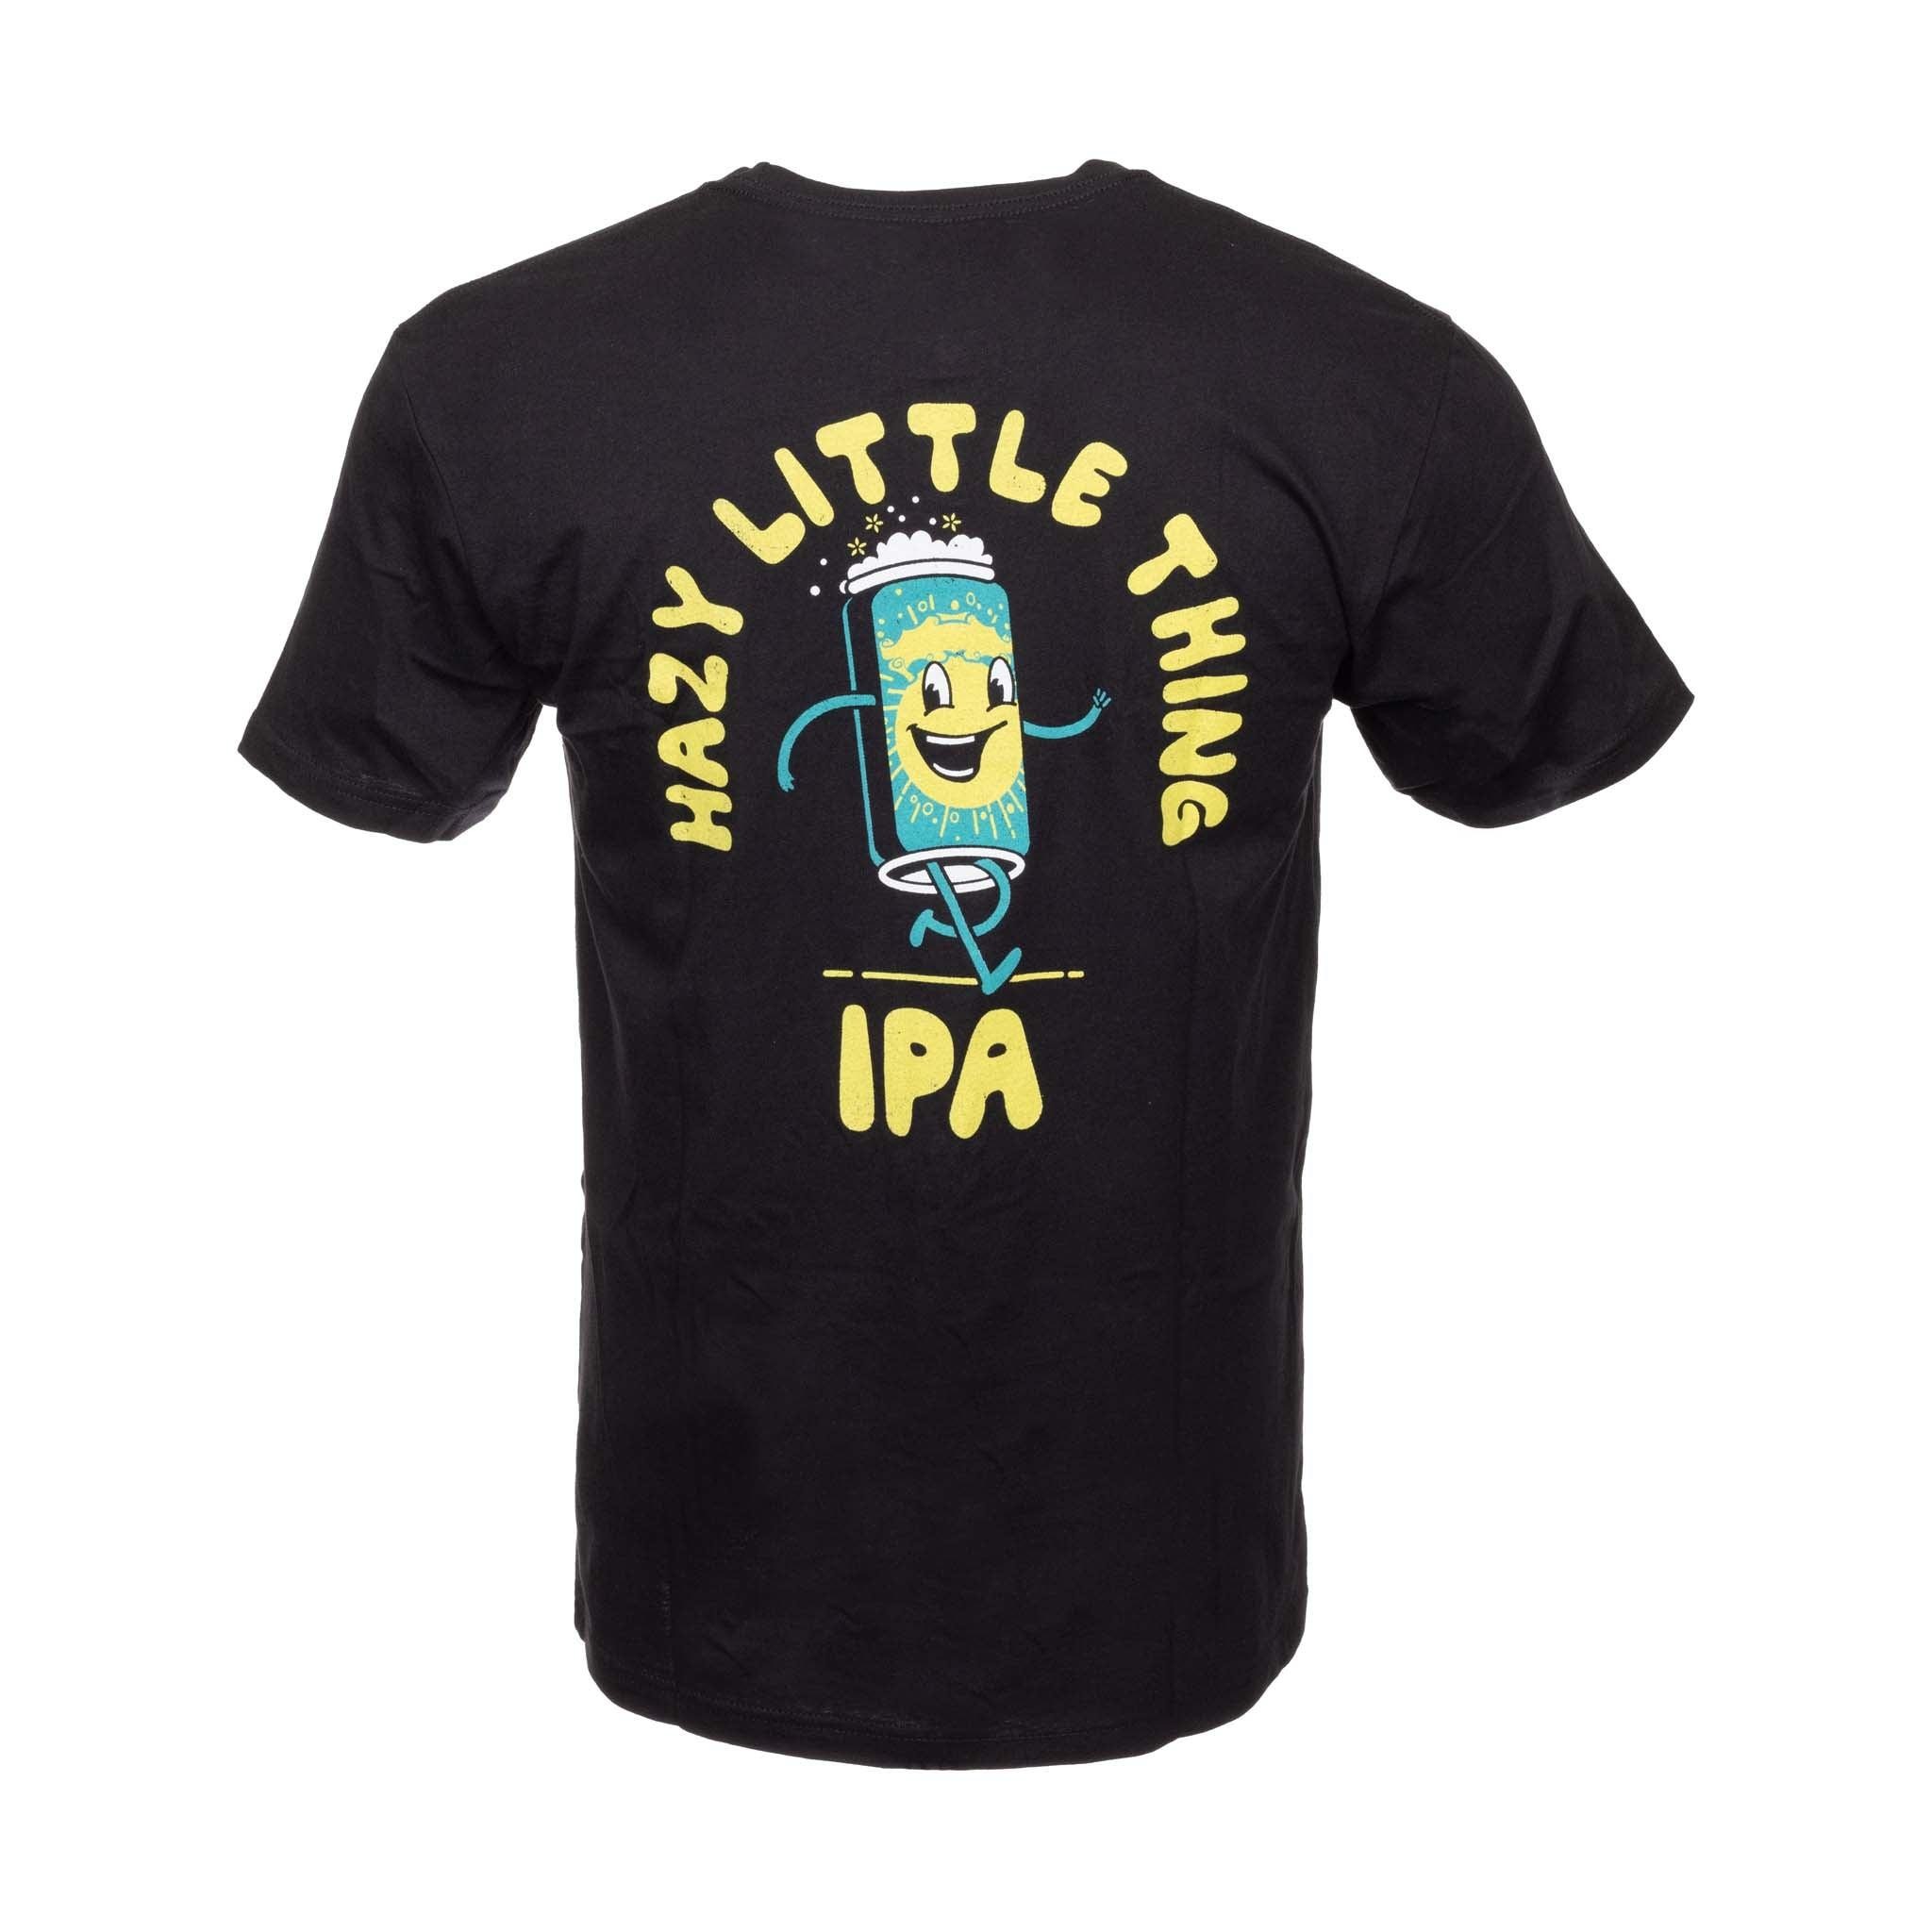 Hazy Little Thing Psychedelic T-Shirt - 2XL